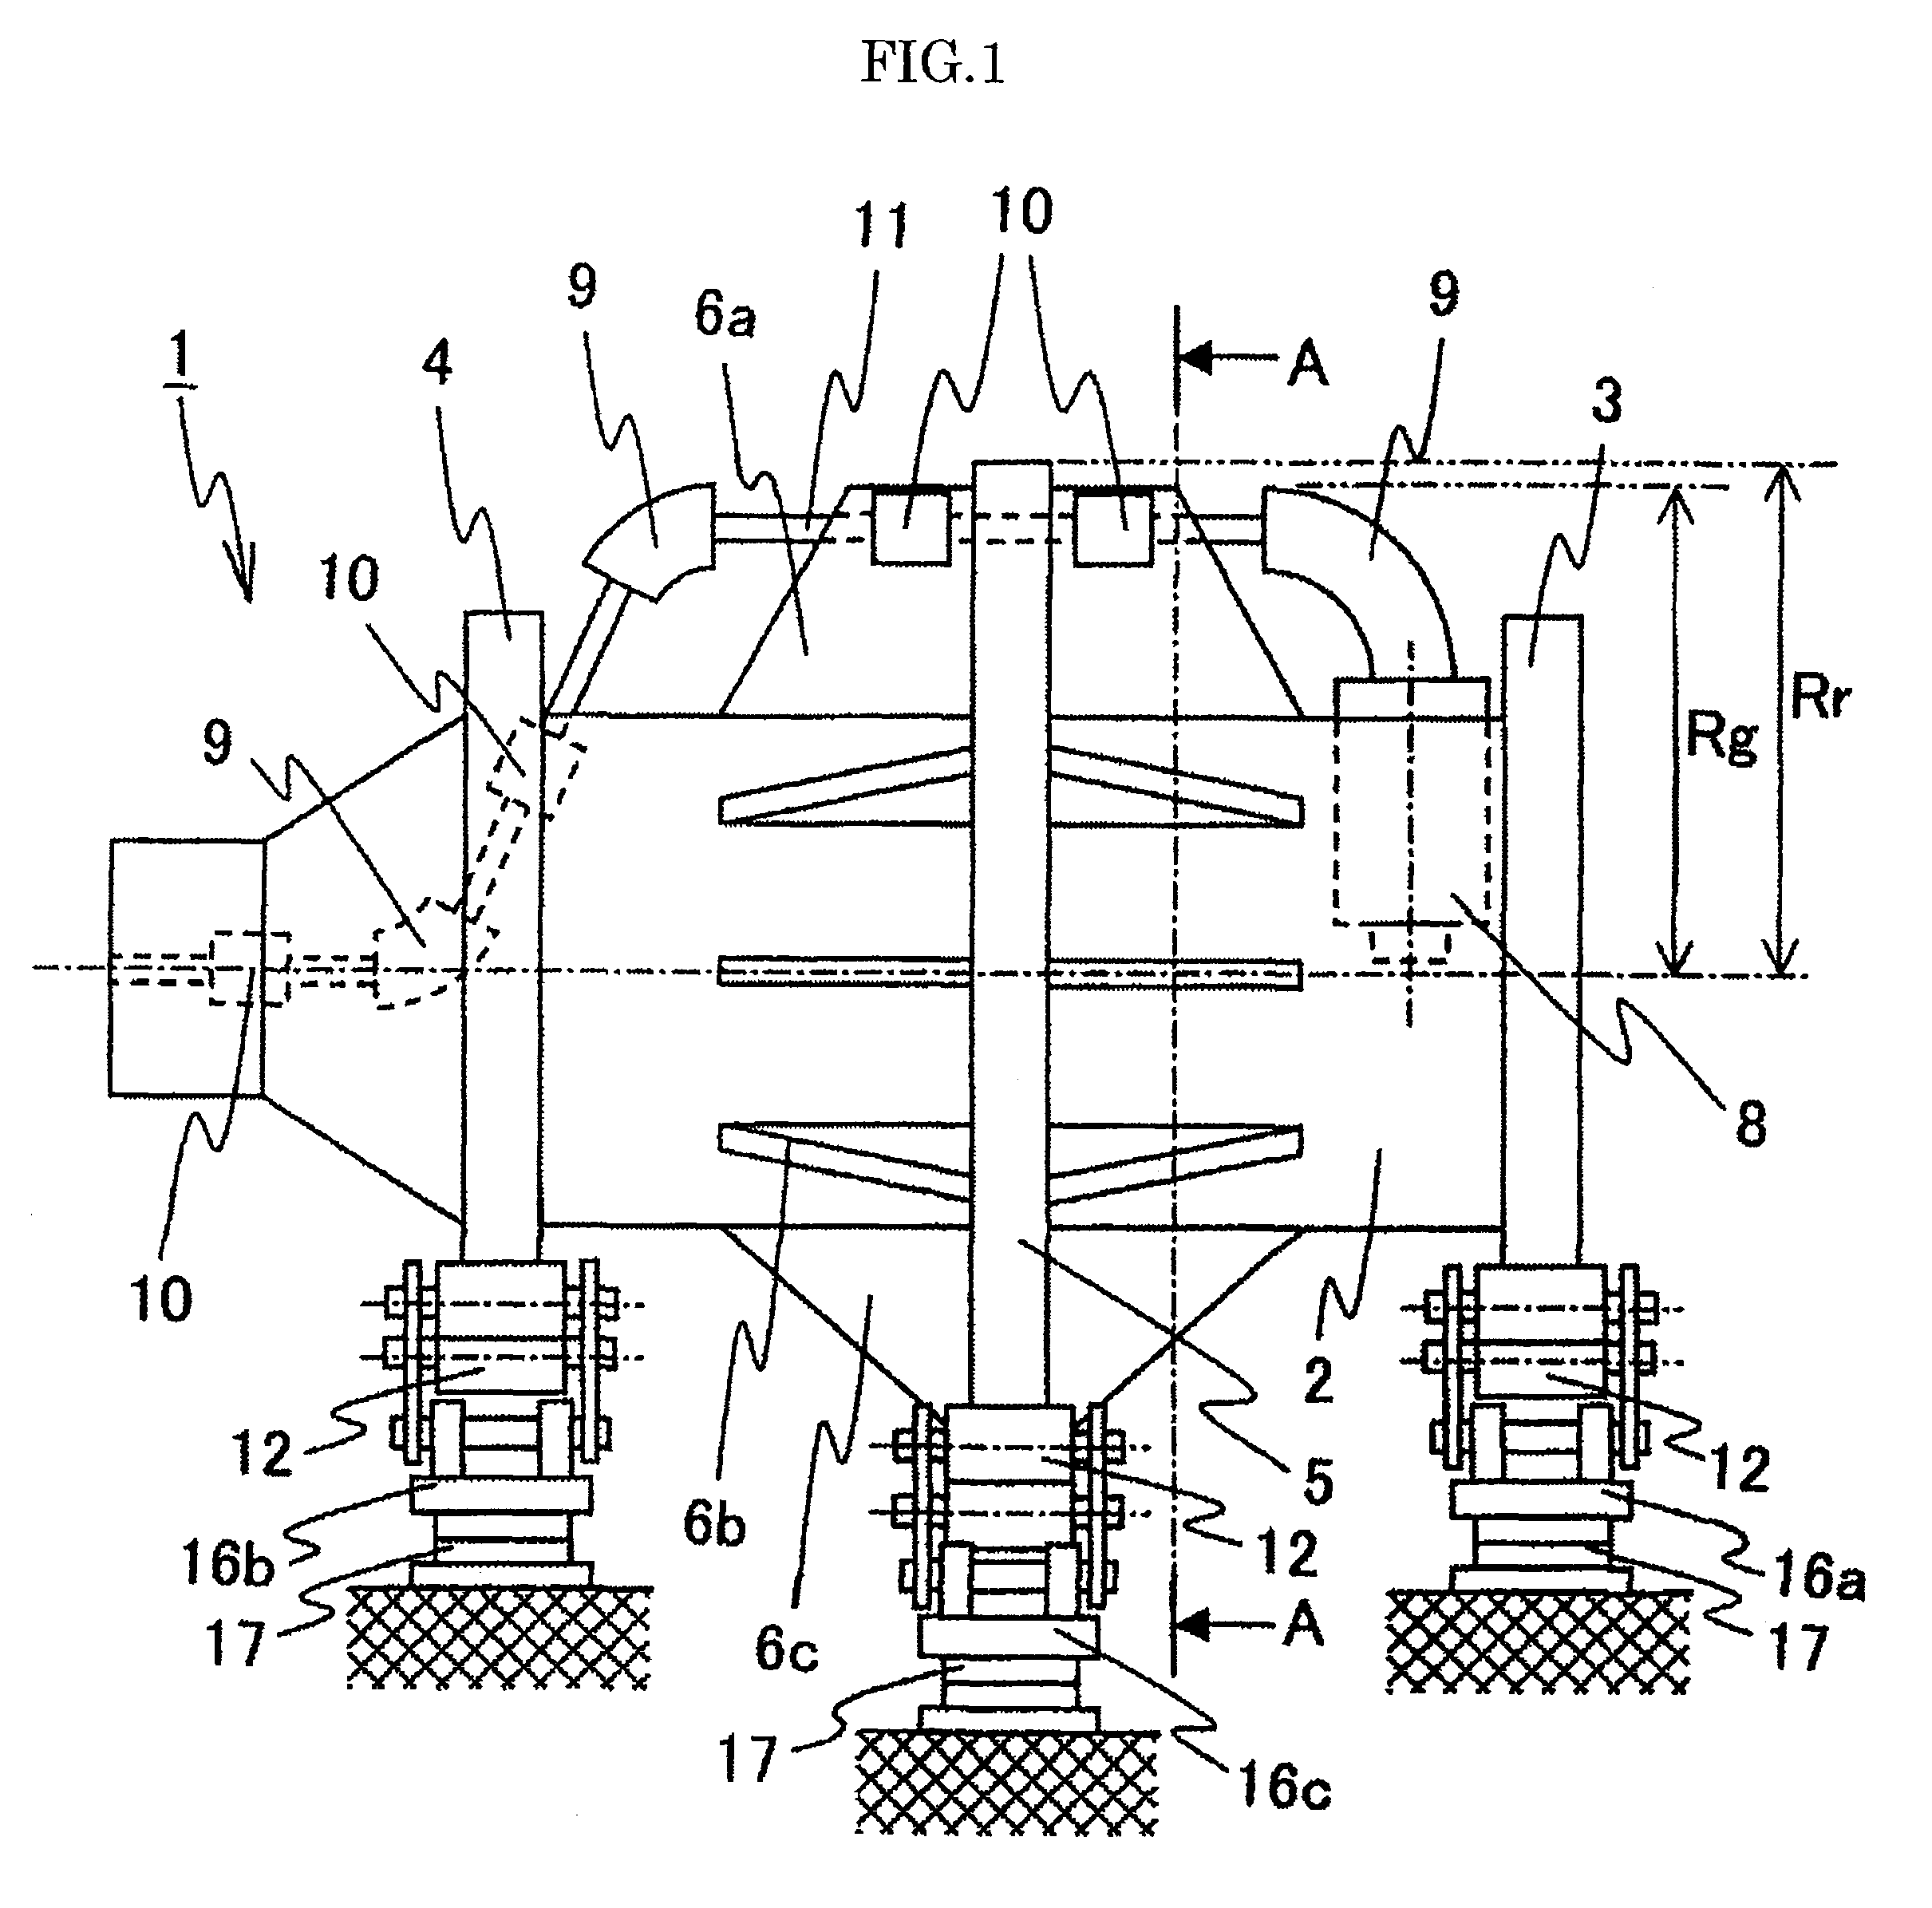 Rotating irradiation therapy apparatus